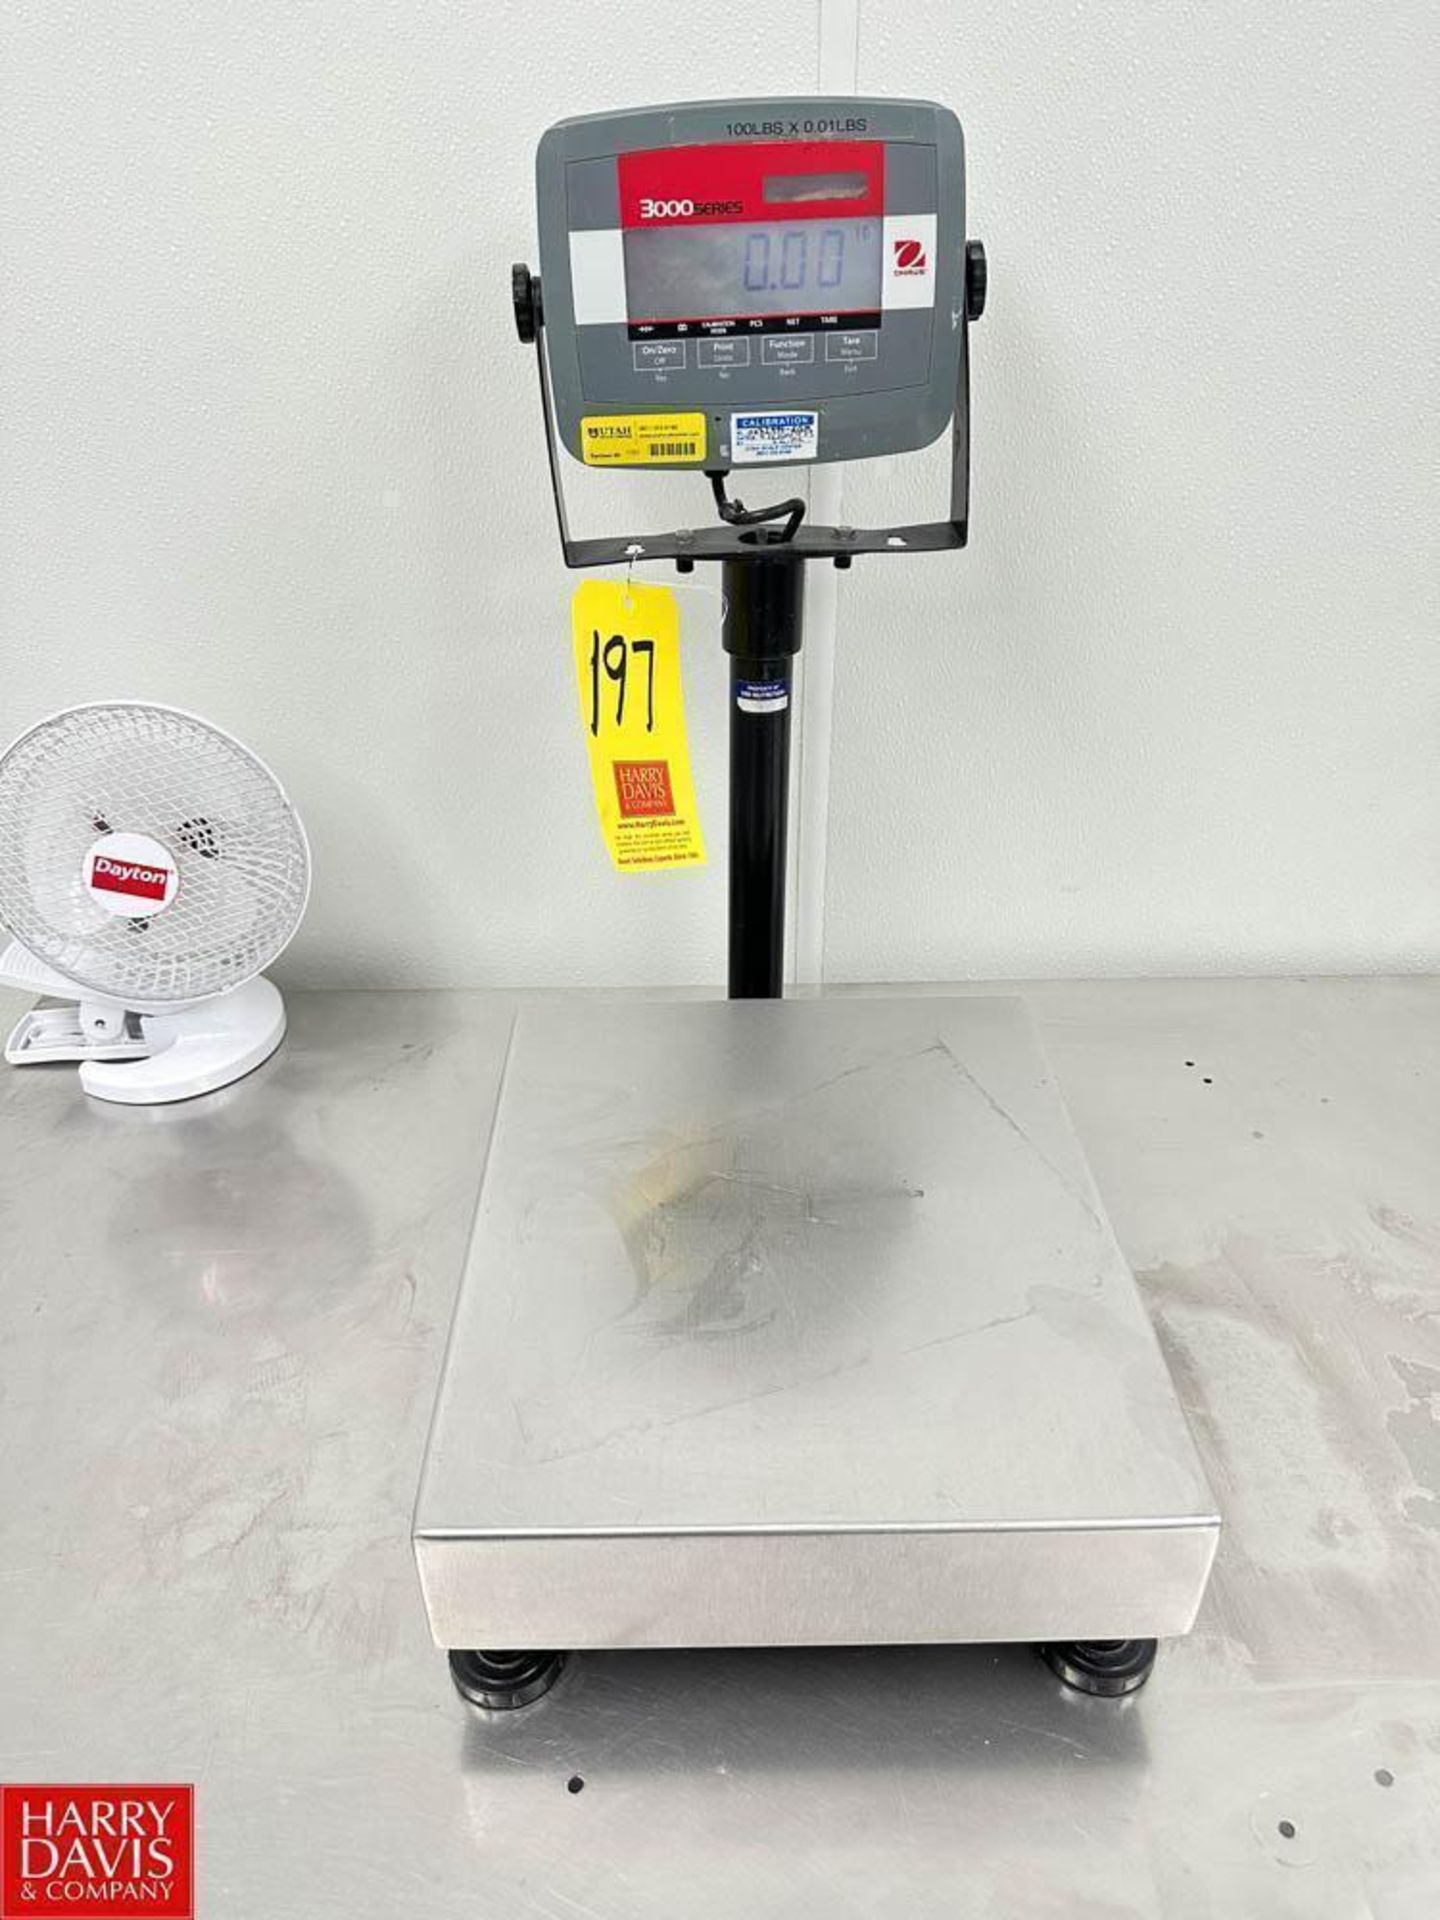 OHAUS 3000 Series Digital Scale - Rigging Fee: $35 - Image 2 of 2